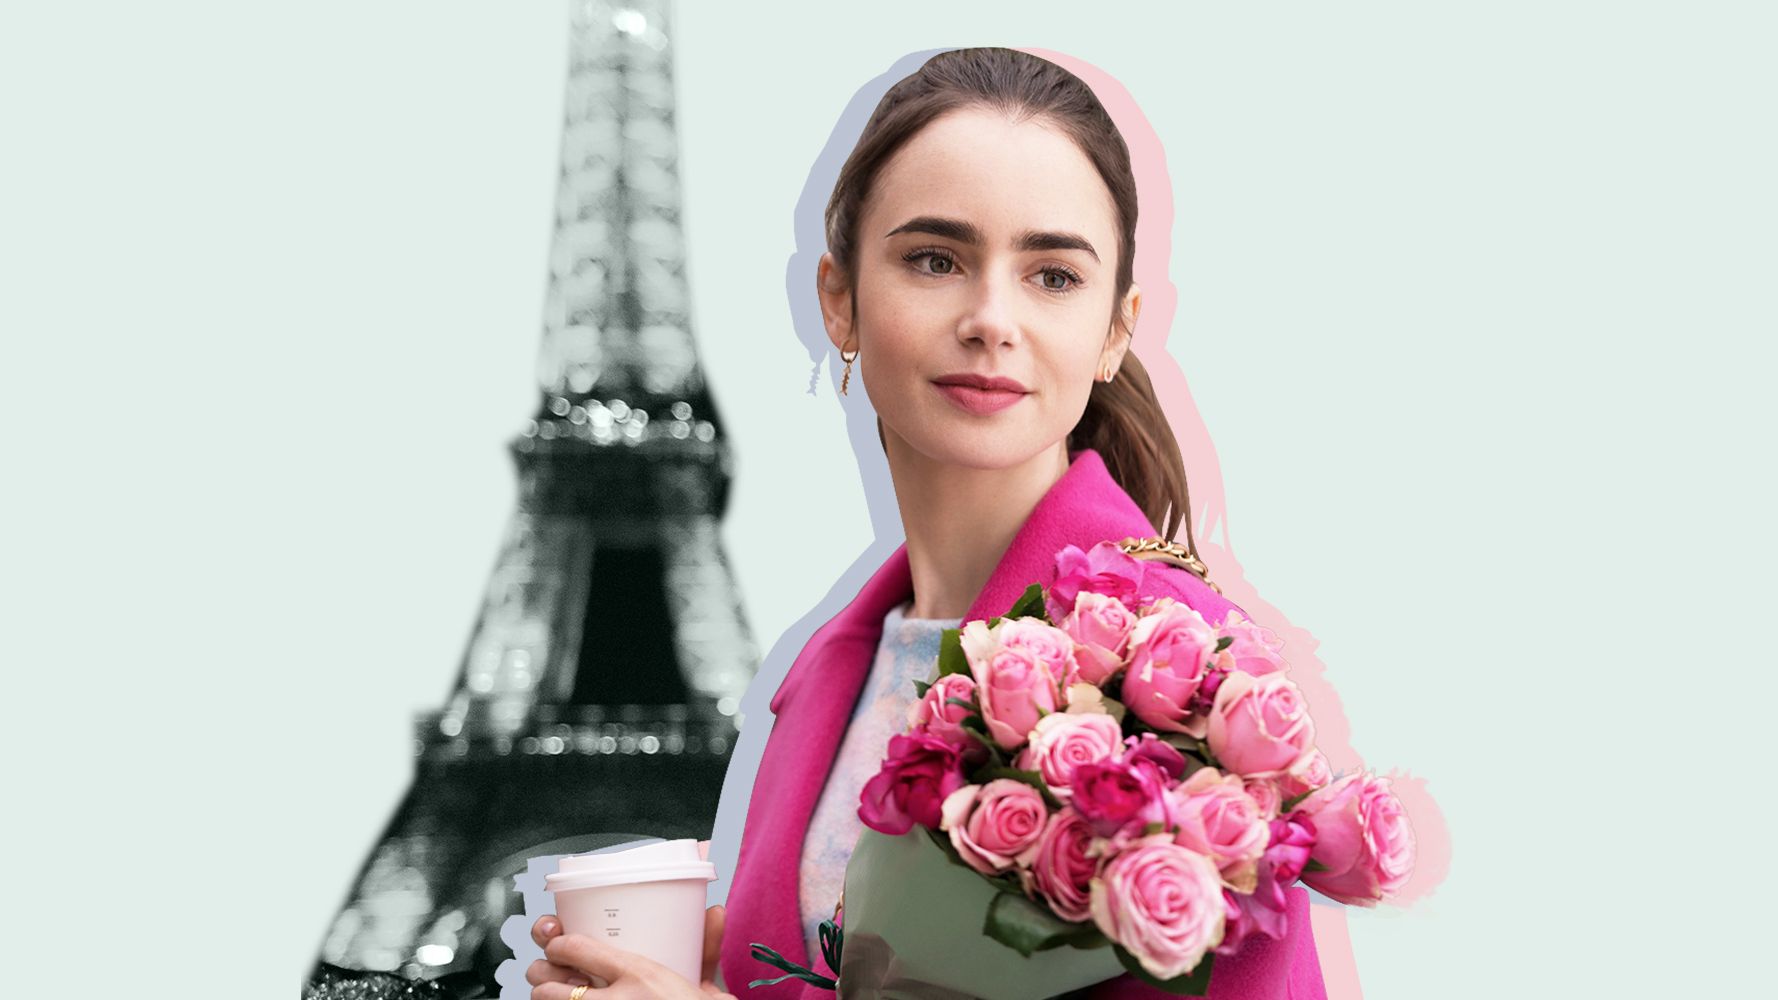 Emily In Paris' Season 2: Updates On Filming, The Cast & More